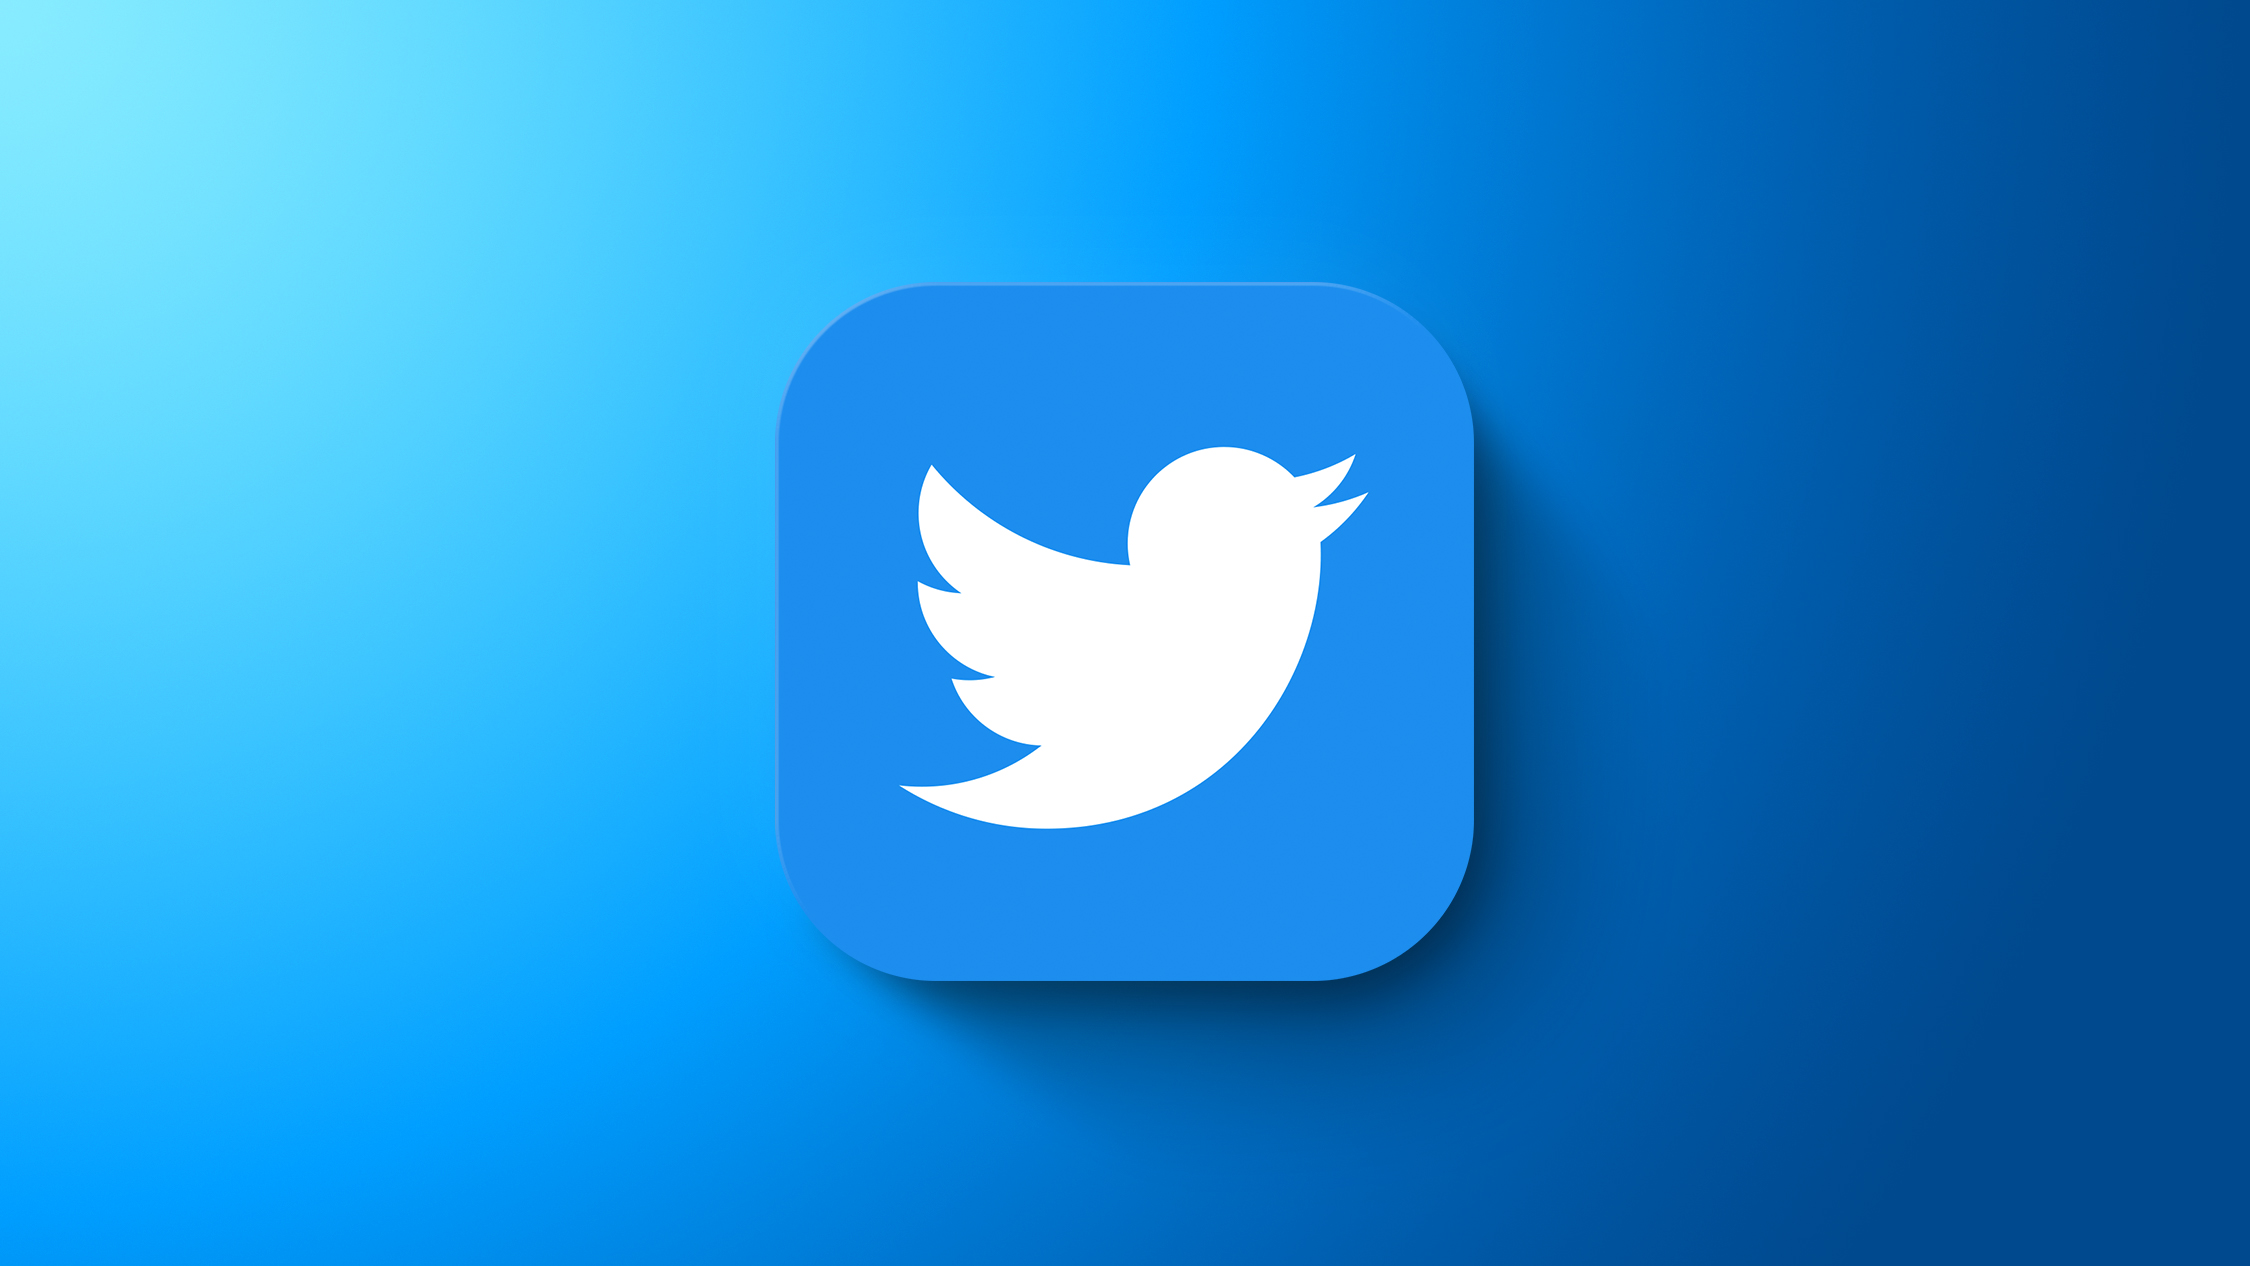 Twitter’s Algorithmic ‘For You’ Feed Becomes Default Timeline on iOS